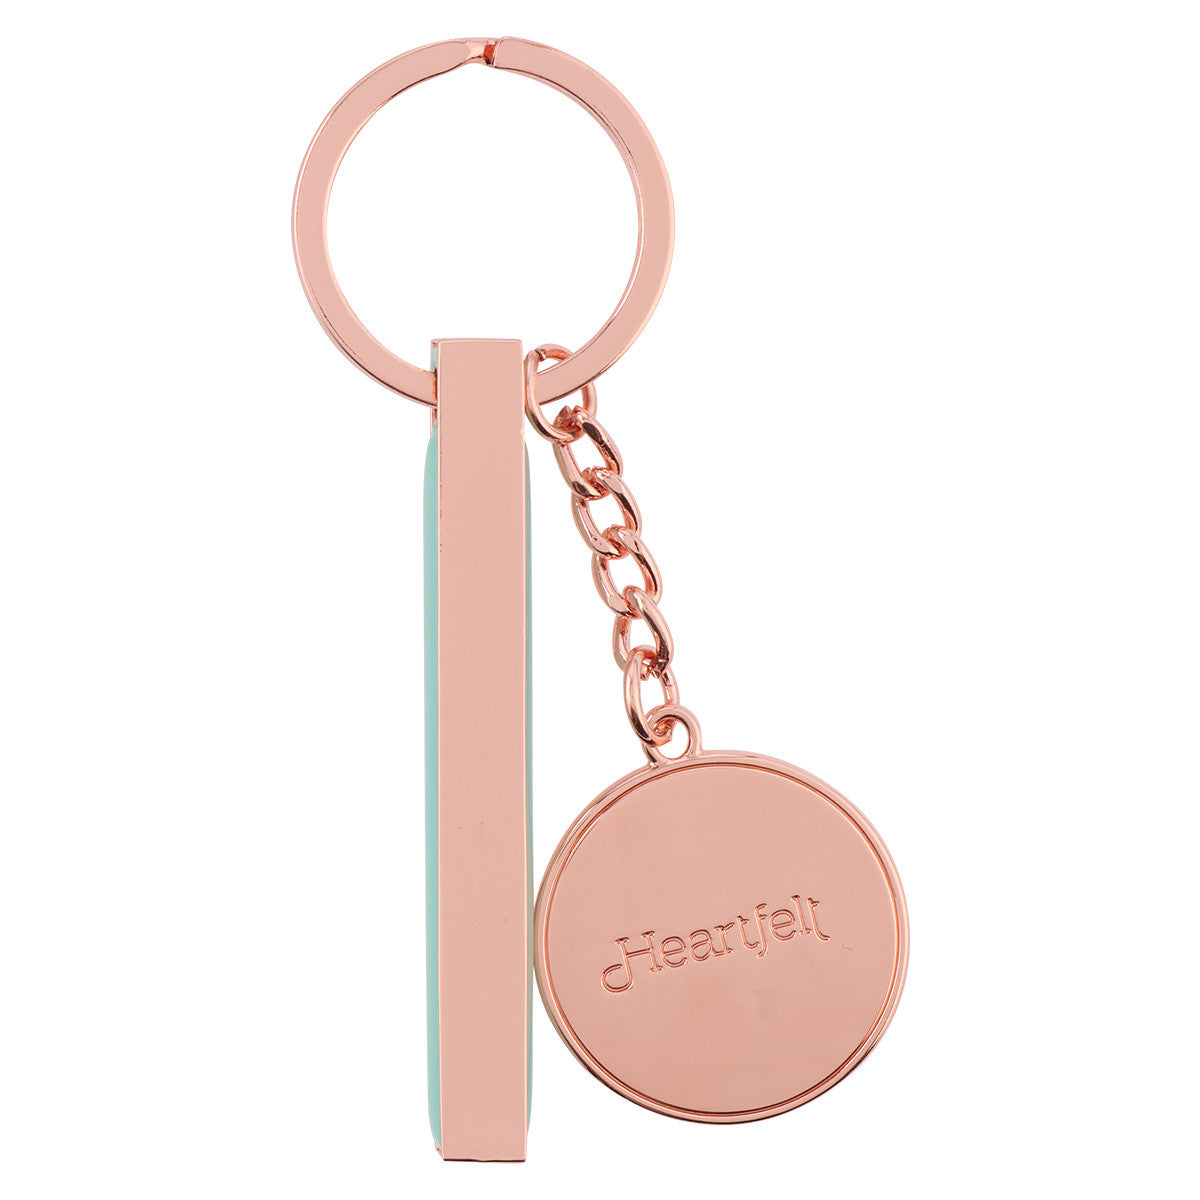 Make Every Day Count Pink Daisies Rose Gold Key Chain - The Christian Gift Company